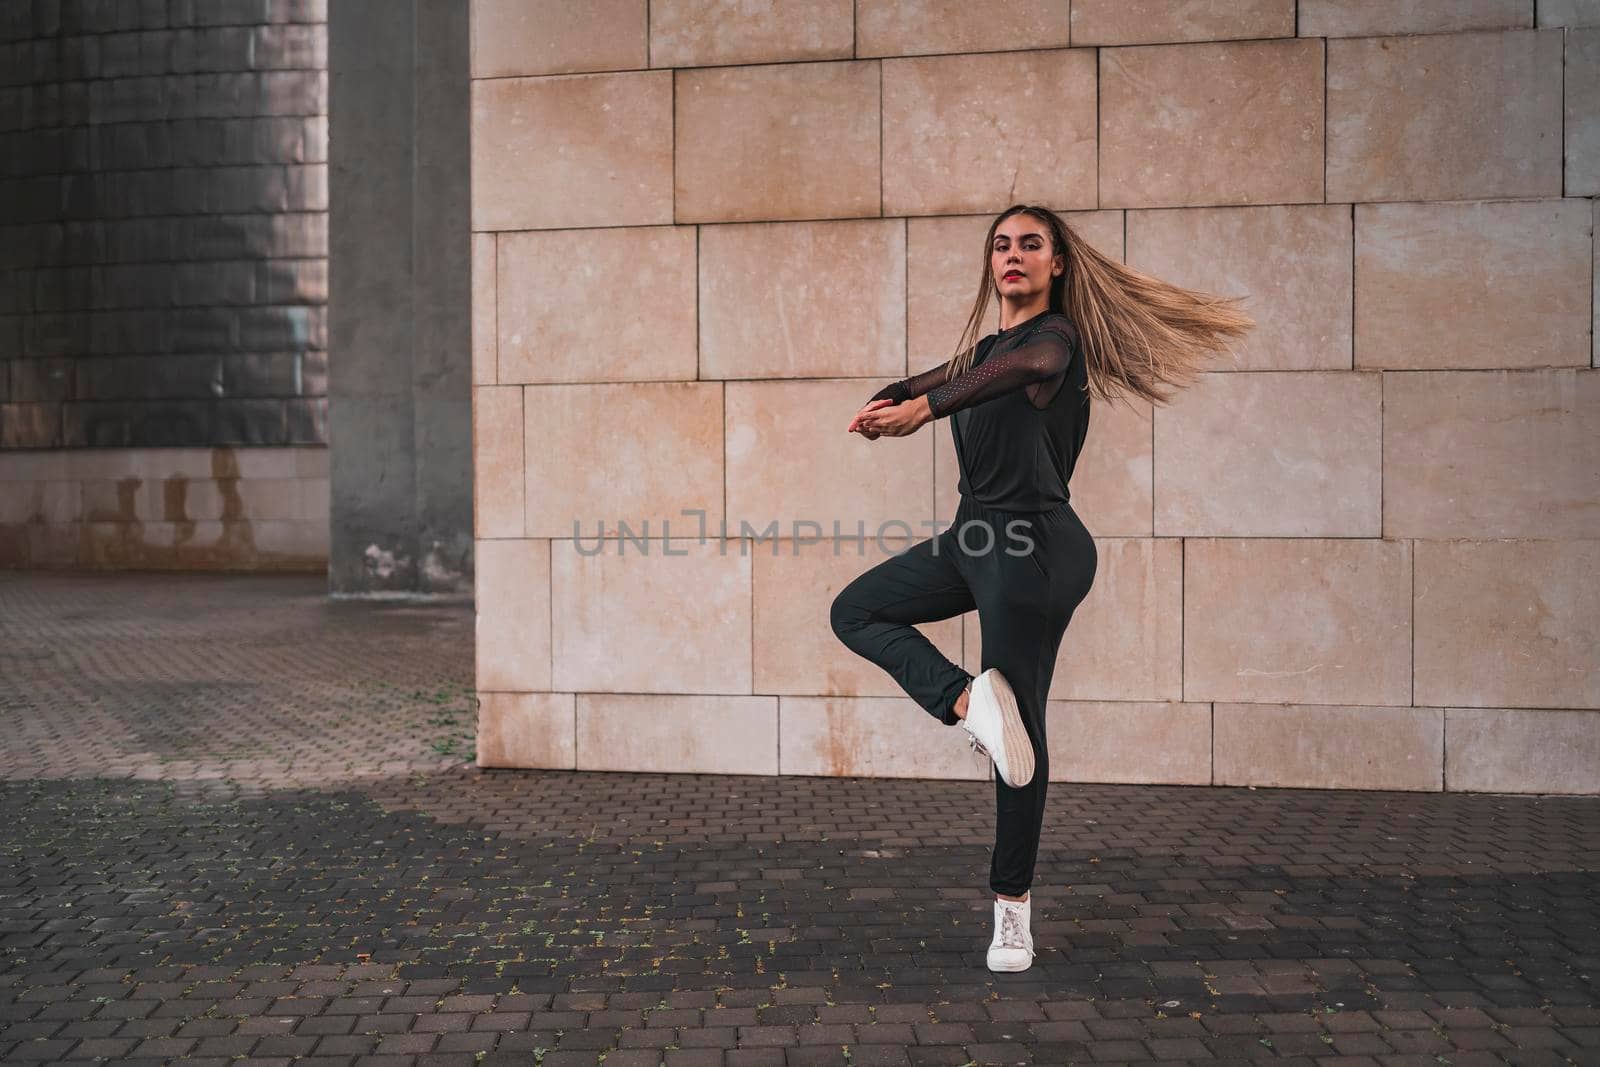 A young ballerina in a black suit does ballet pirouettes on the street. by barcielaphoto